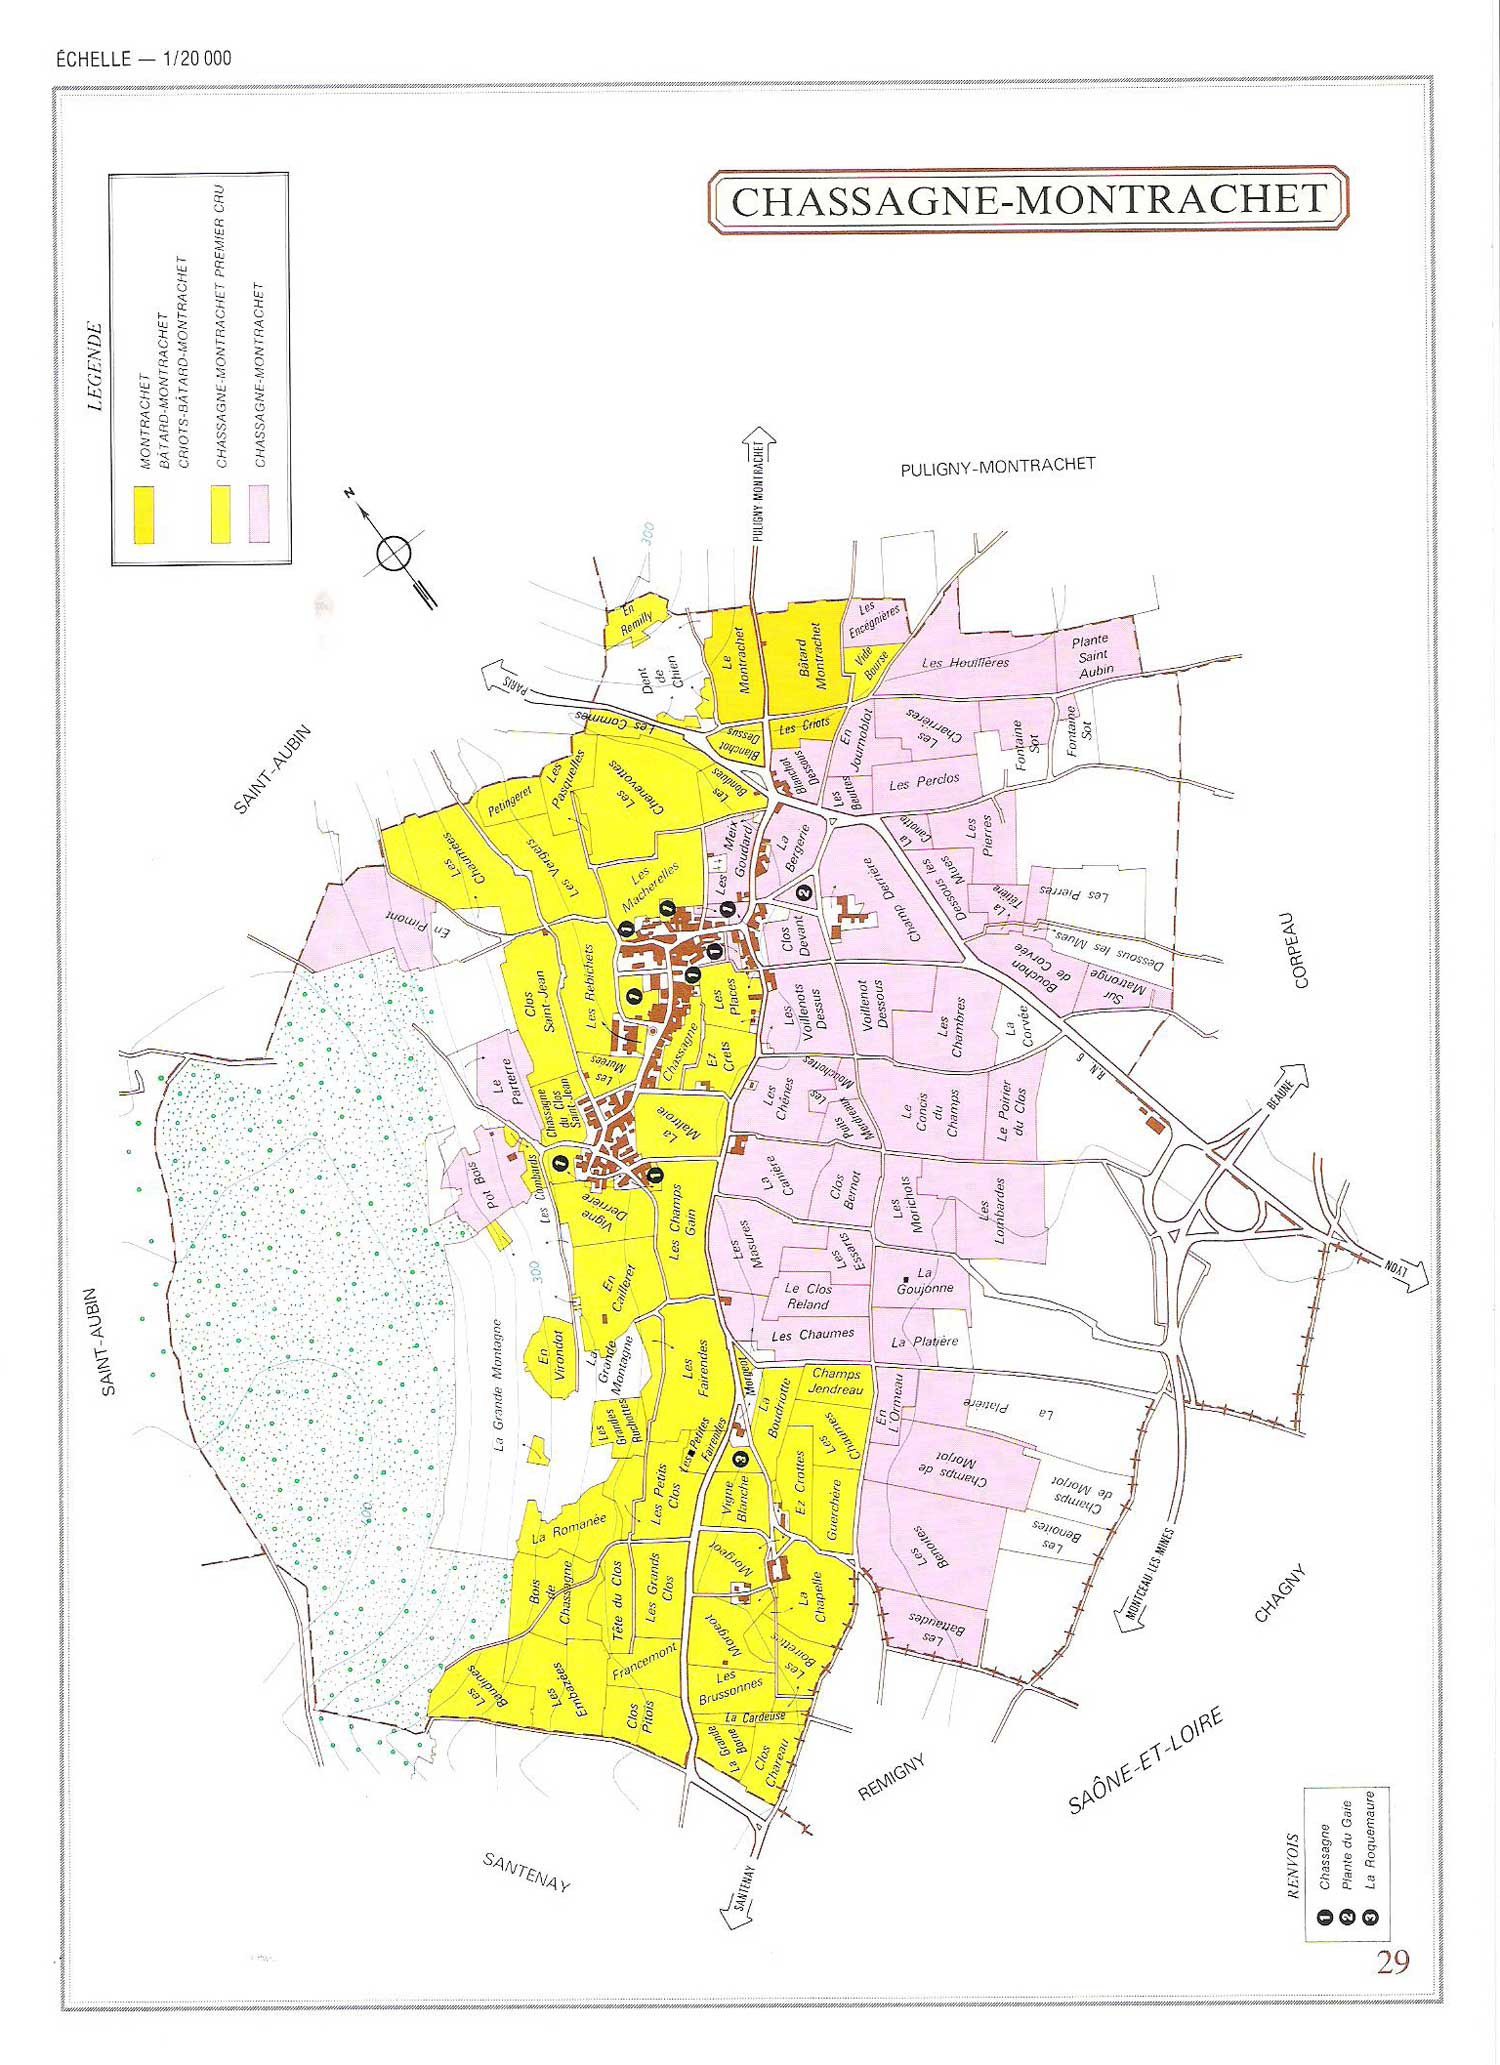 Picture of Chassagne-Montrachet Vineyard Map